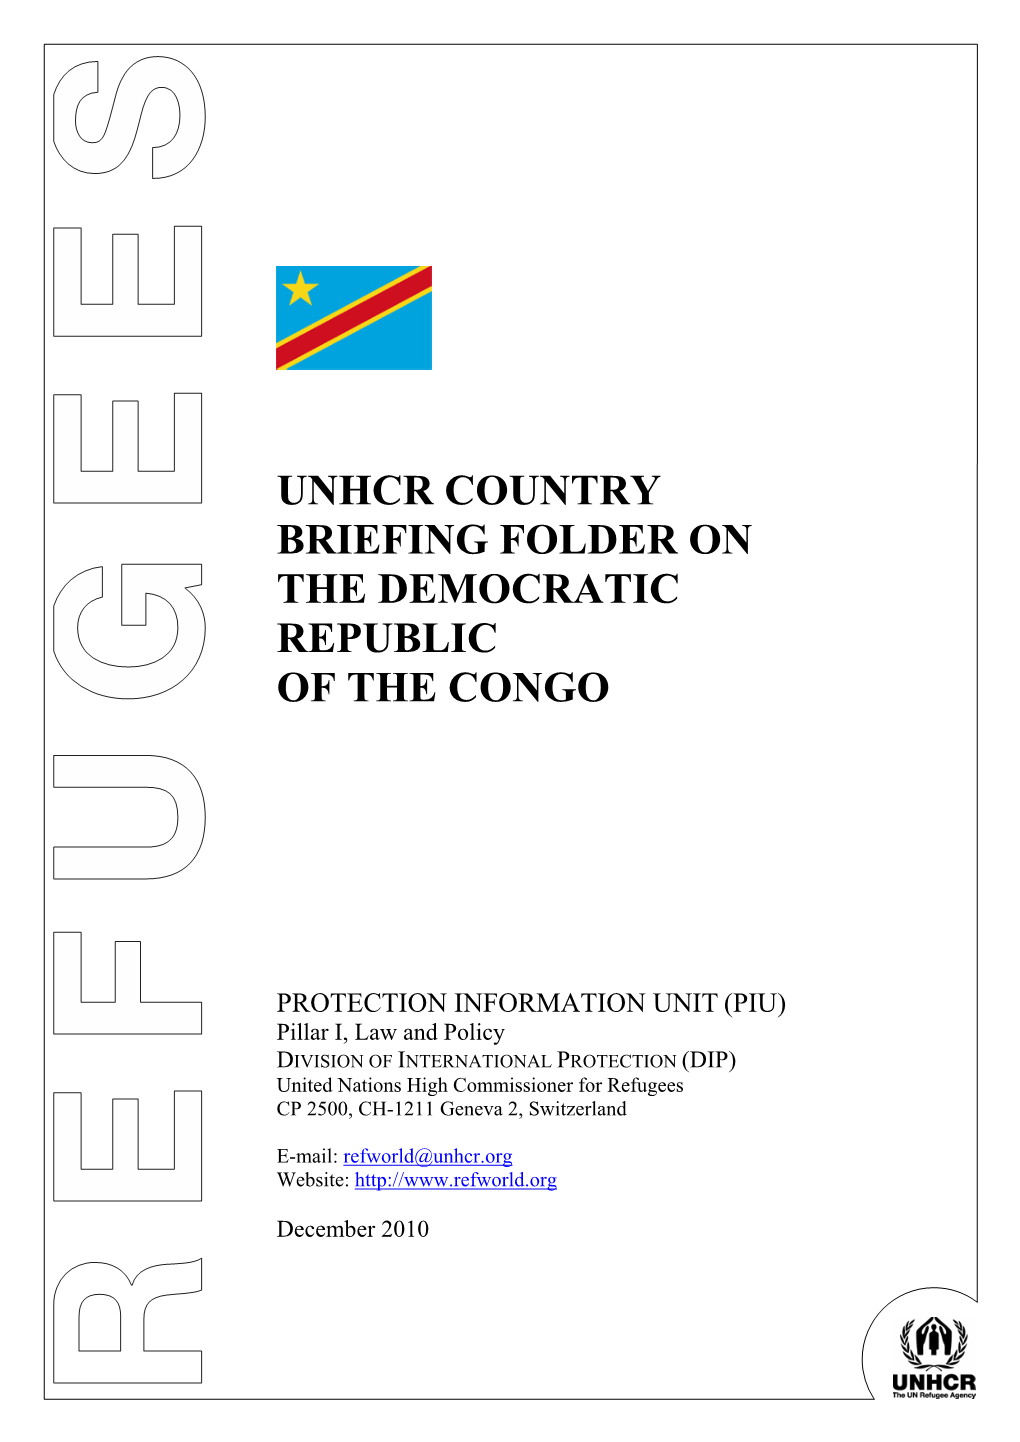 Unhcr Country Briefing Folder on the Democratic Republic of the Congo